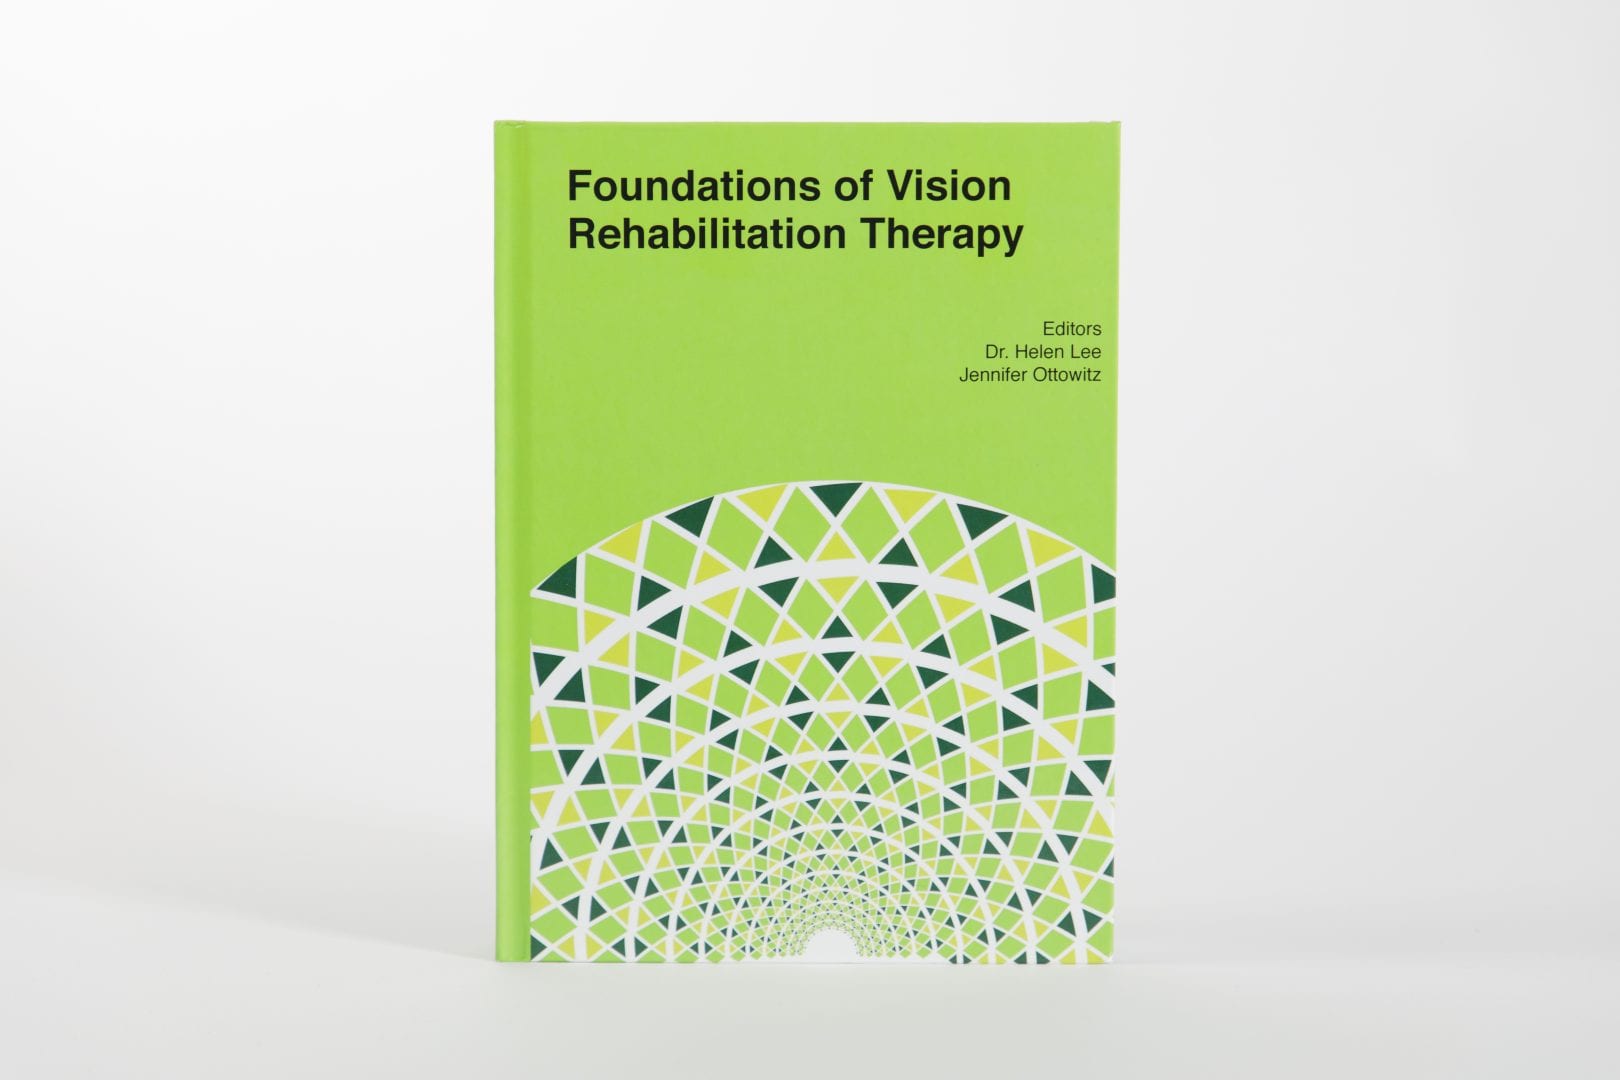 the bright green cover of the second edition book titled "Foundations of vision Rehabilitation therapy"